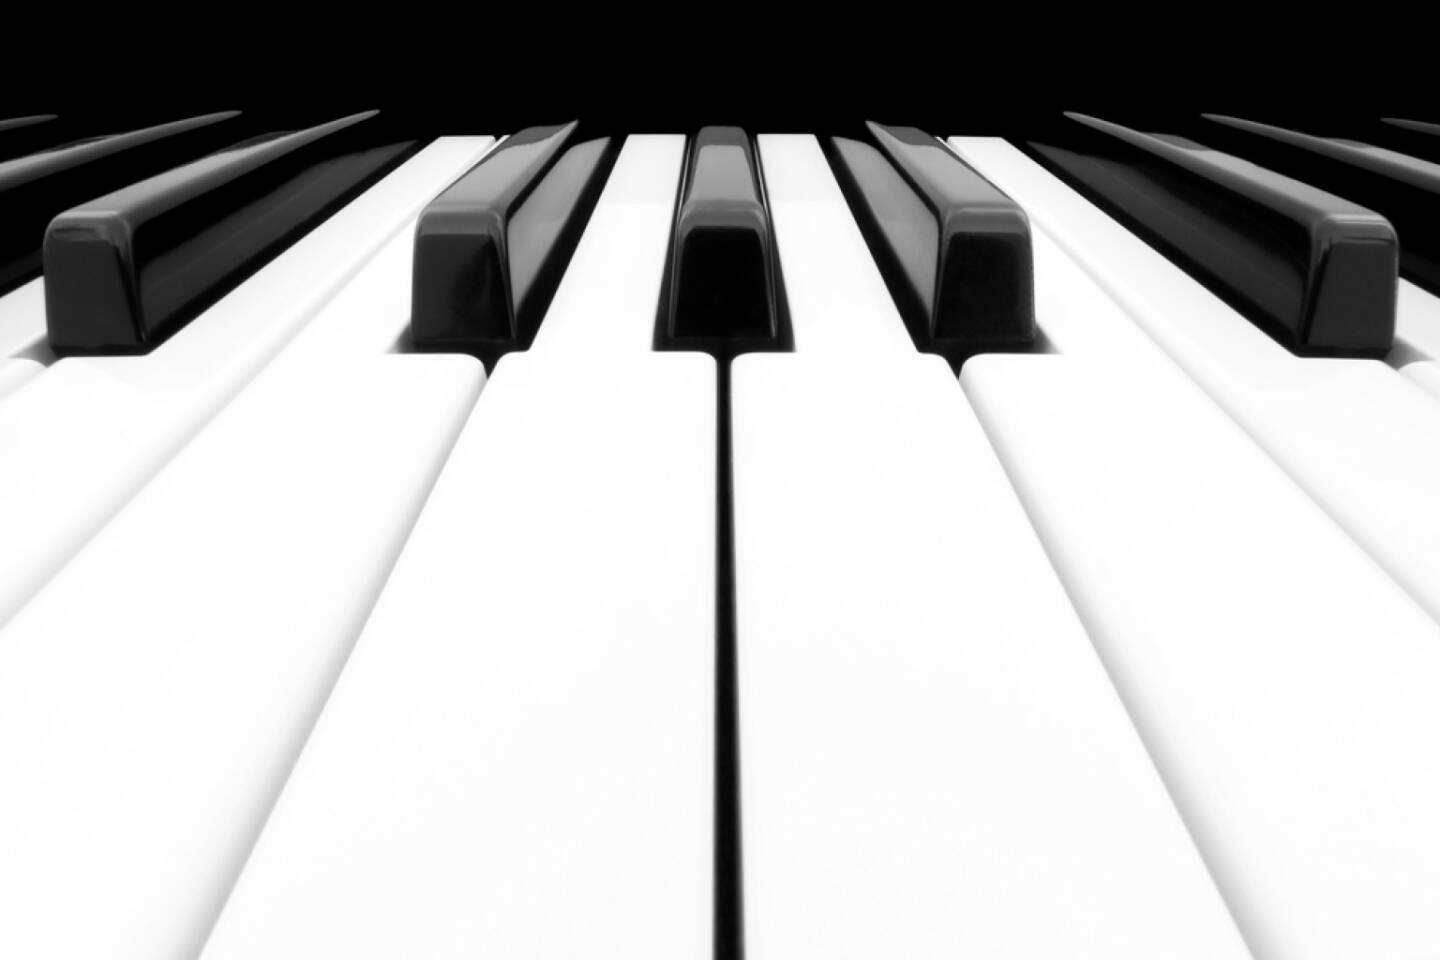 Klavier, Tastatur, Musik, Saite, http://www.shutterstock.com/de/pic-103345379/stock-photo-close-up-of-piano-keyboard-centred-on-ab-with-plenty-of-white-space.html 